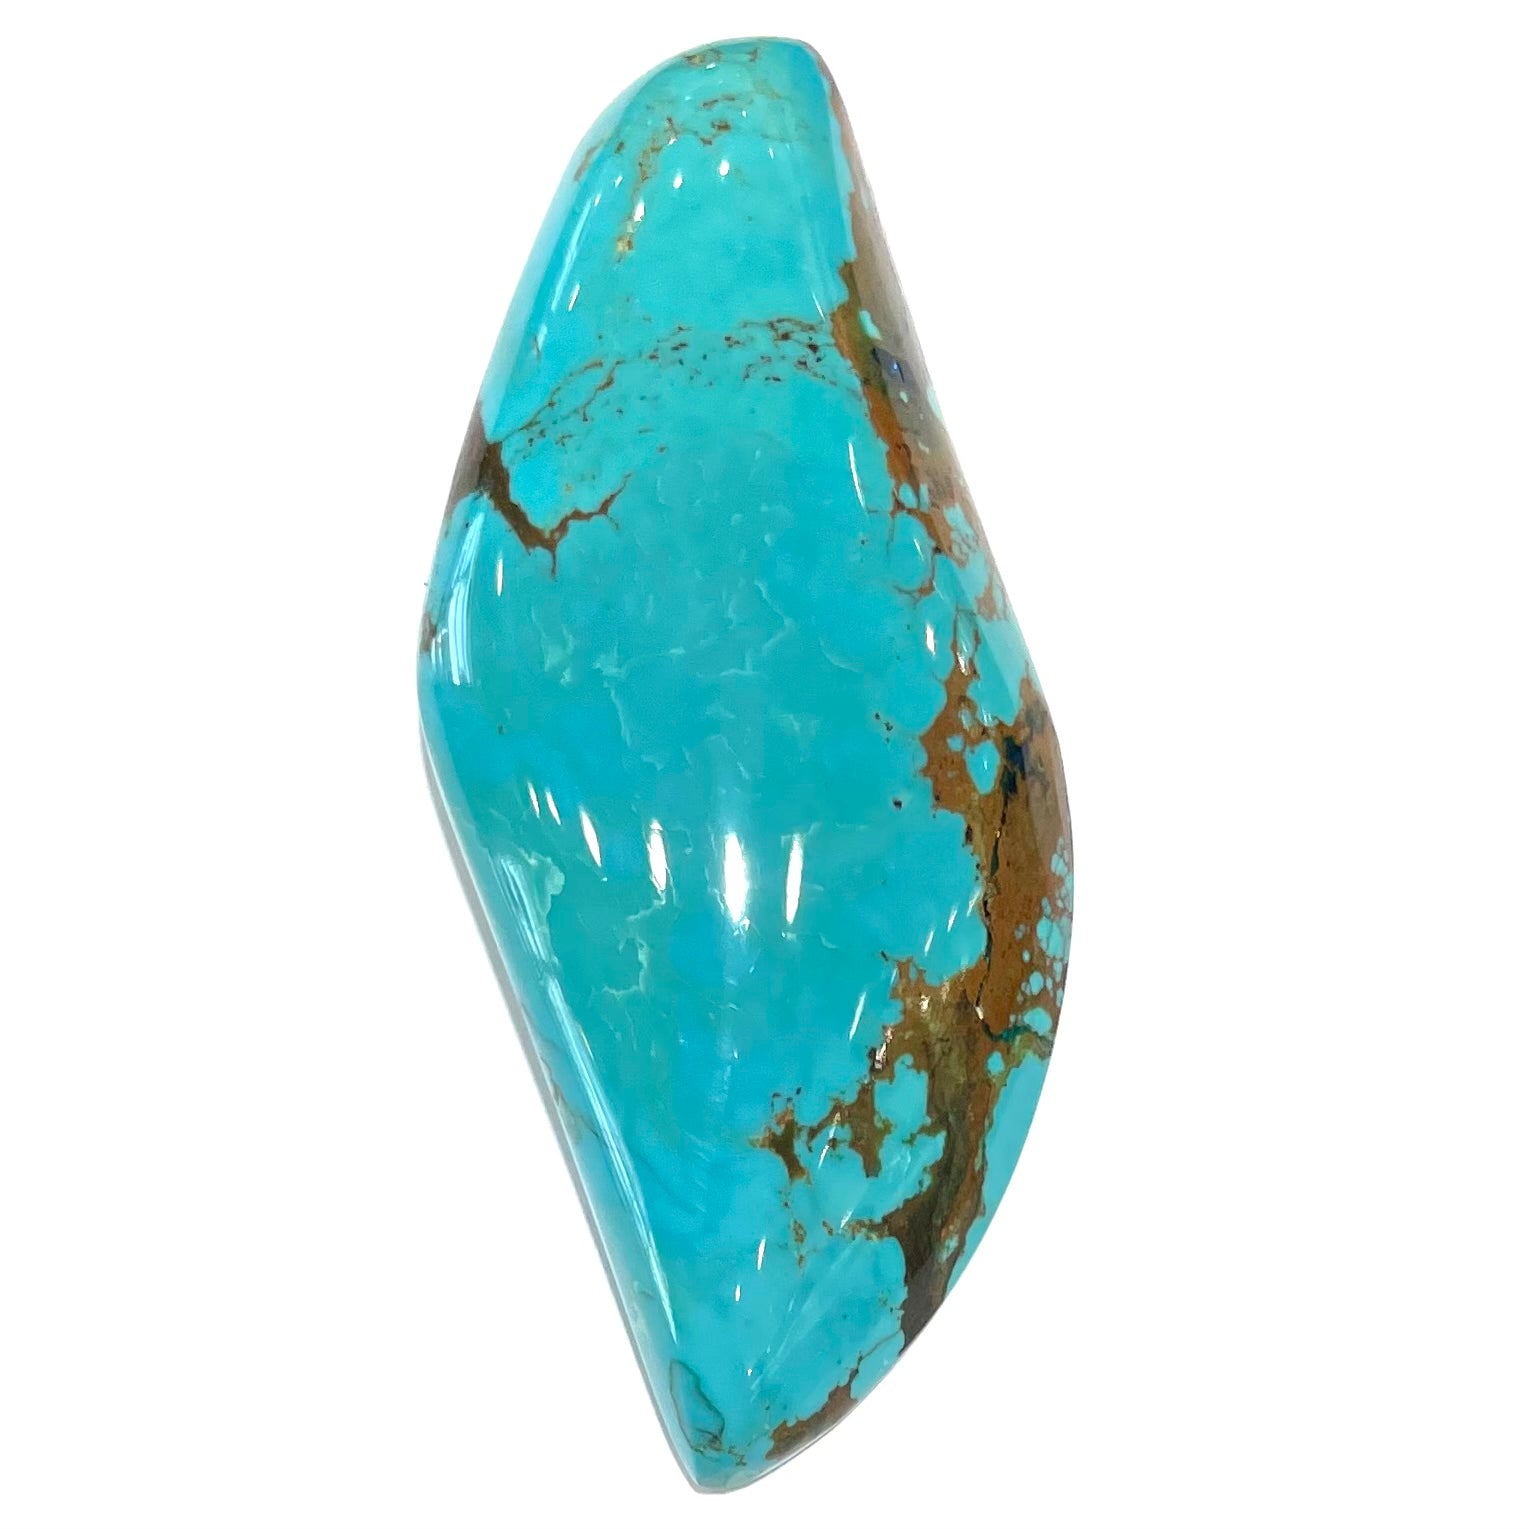 A freeform cabochon cut Bisbee turquoise stone.  The stone has been dyed to improve color.